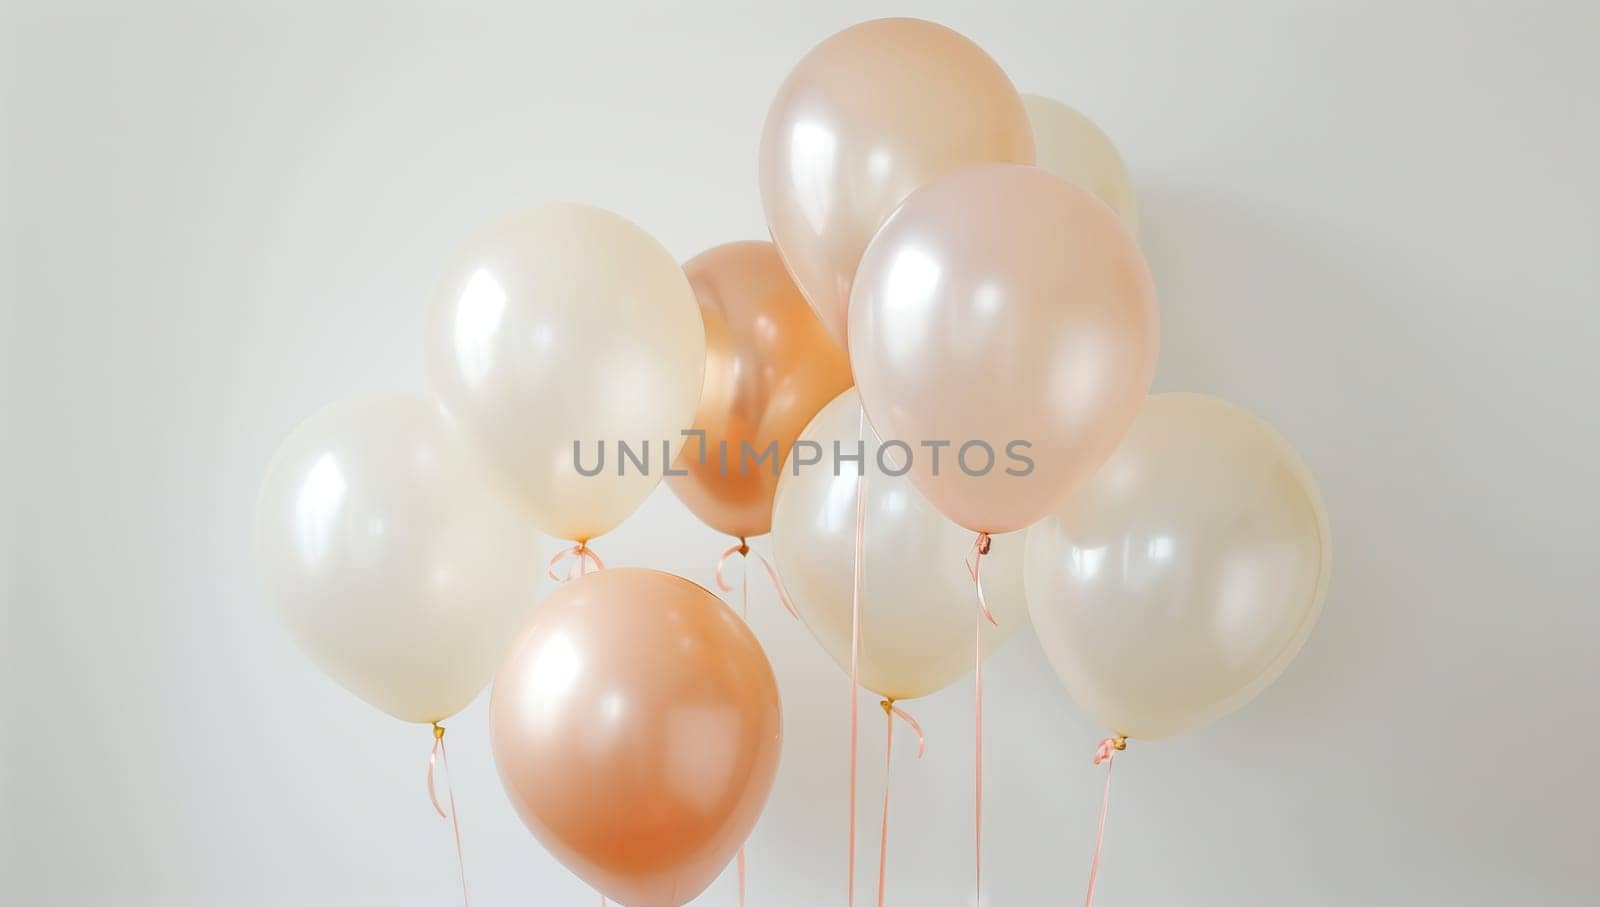 A string of peach balloons, a natural material craft as party supplies, hanging against a white wall for an event. Creative arts and fashion accessory in transparent balloon jewellery